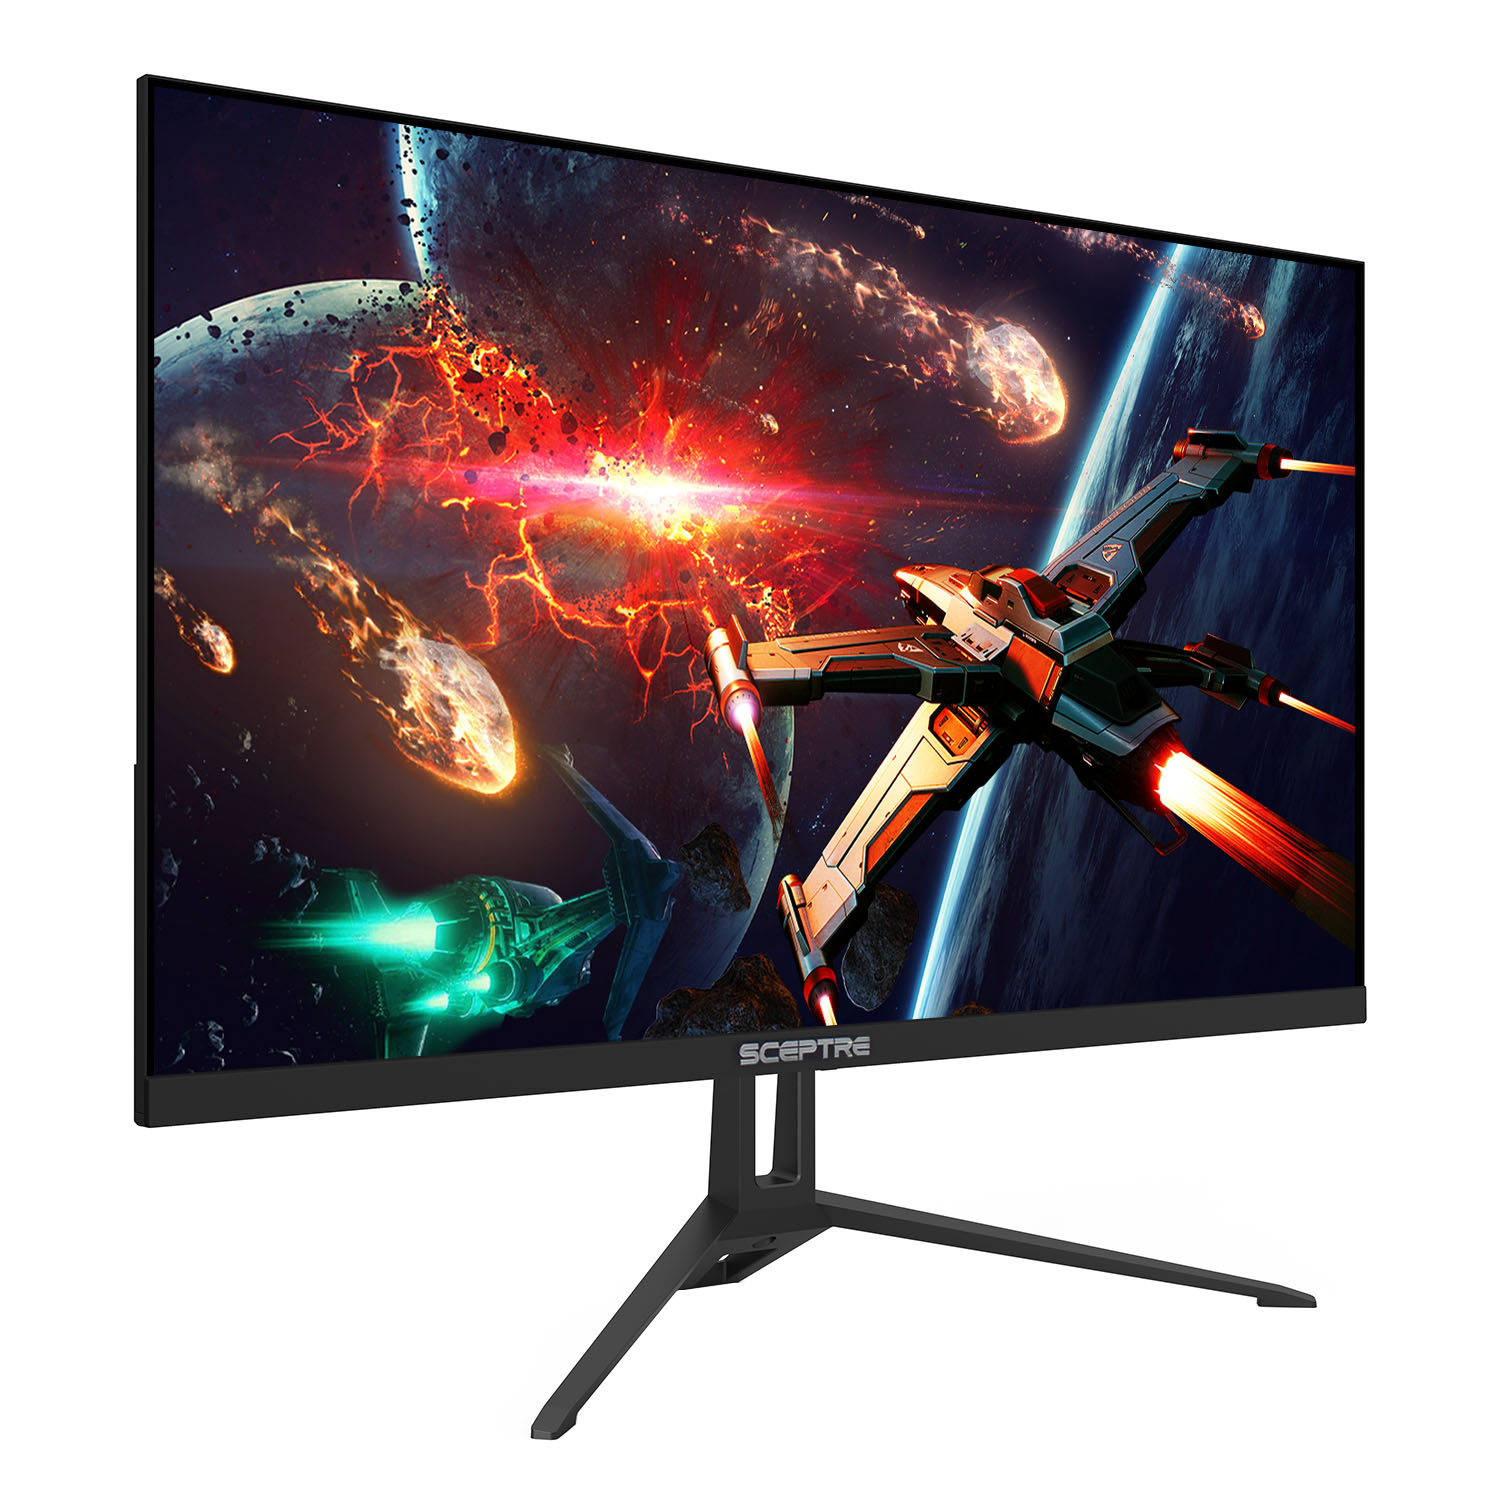 24" Gaming Monitor 1080p up to 165Hz 91% sRGB AMD FreeSync, Build-in Speakers Machine Black 2022 (E248B-FWS168) - image 4 of 6